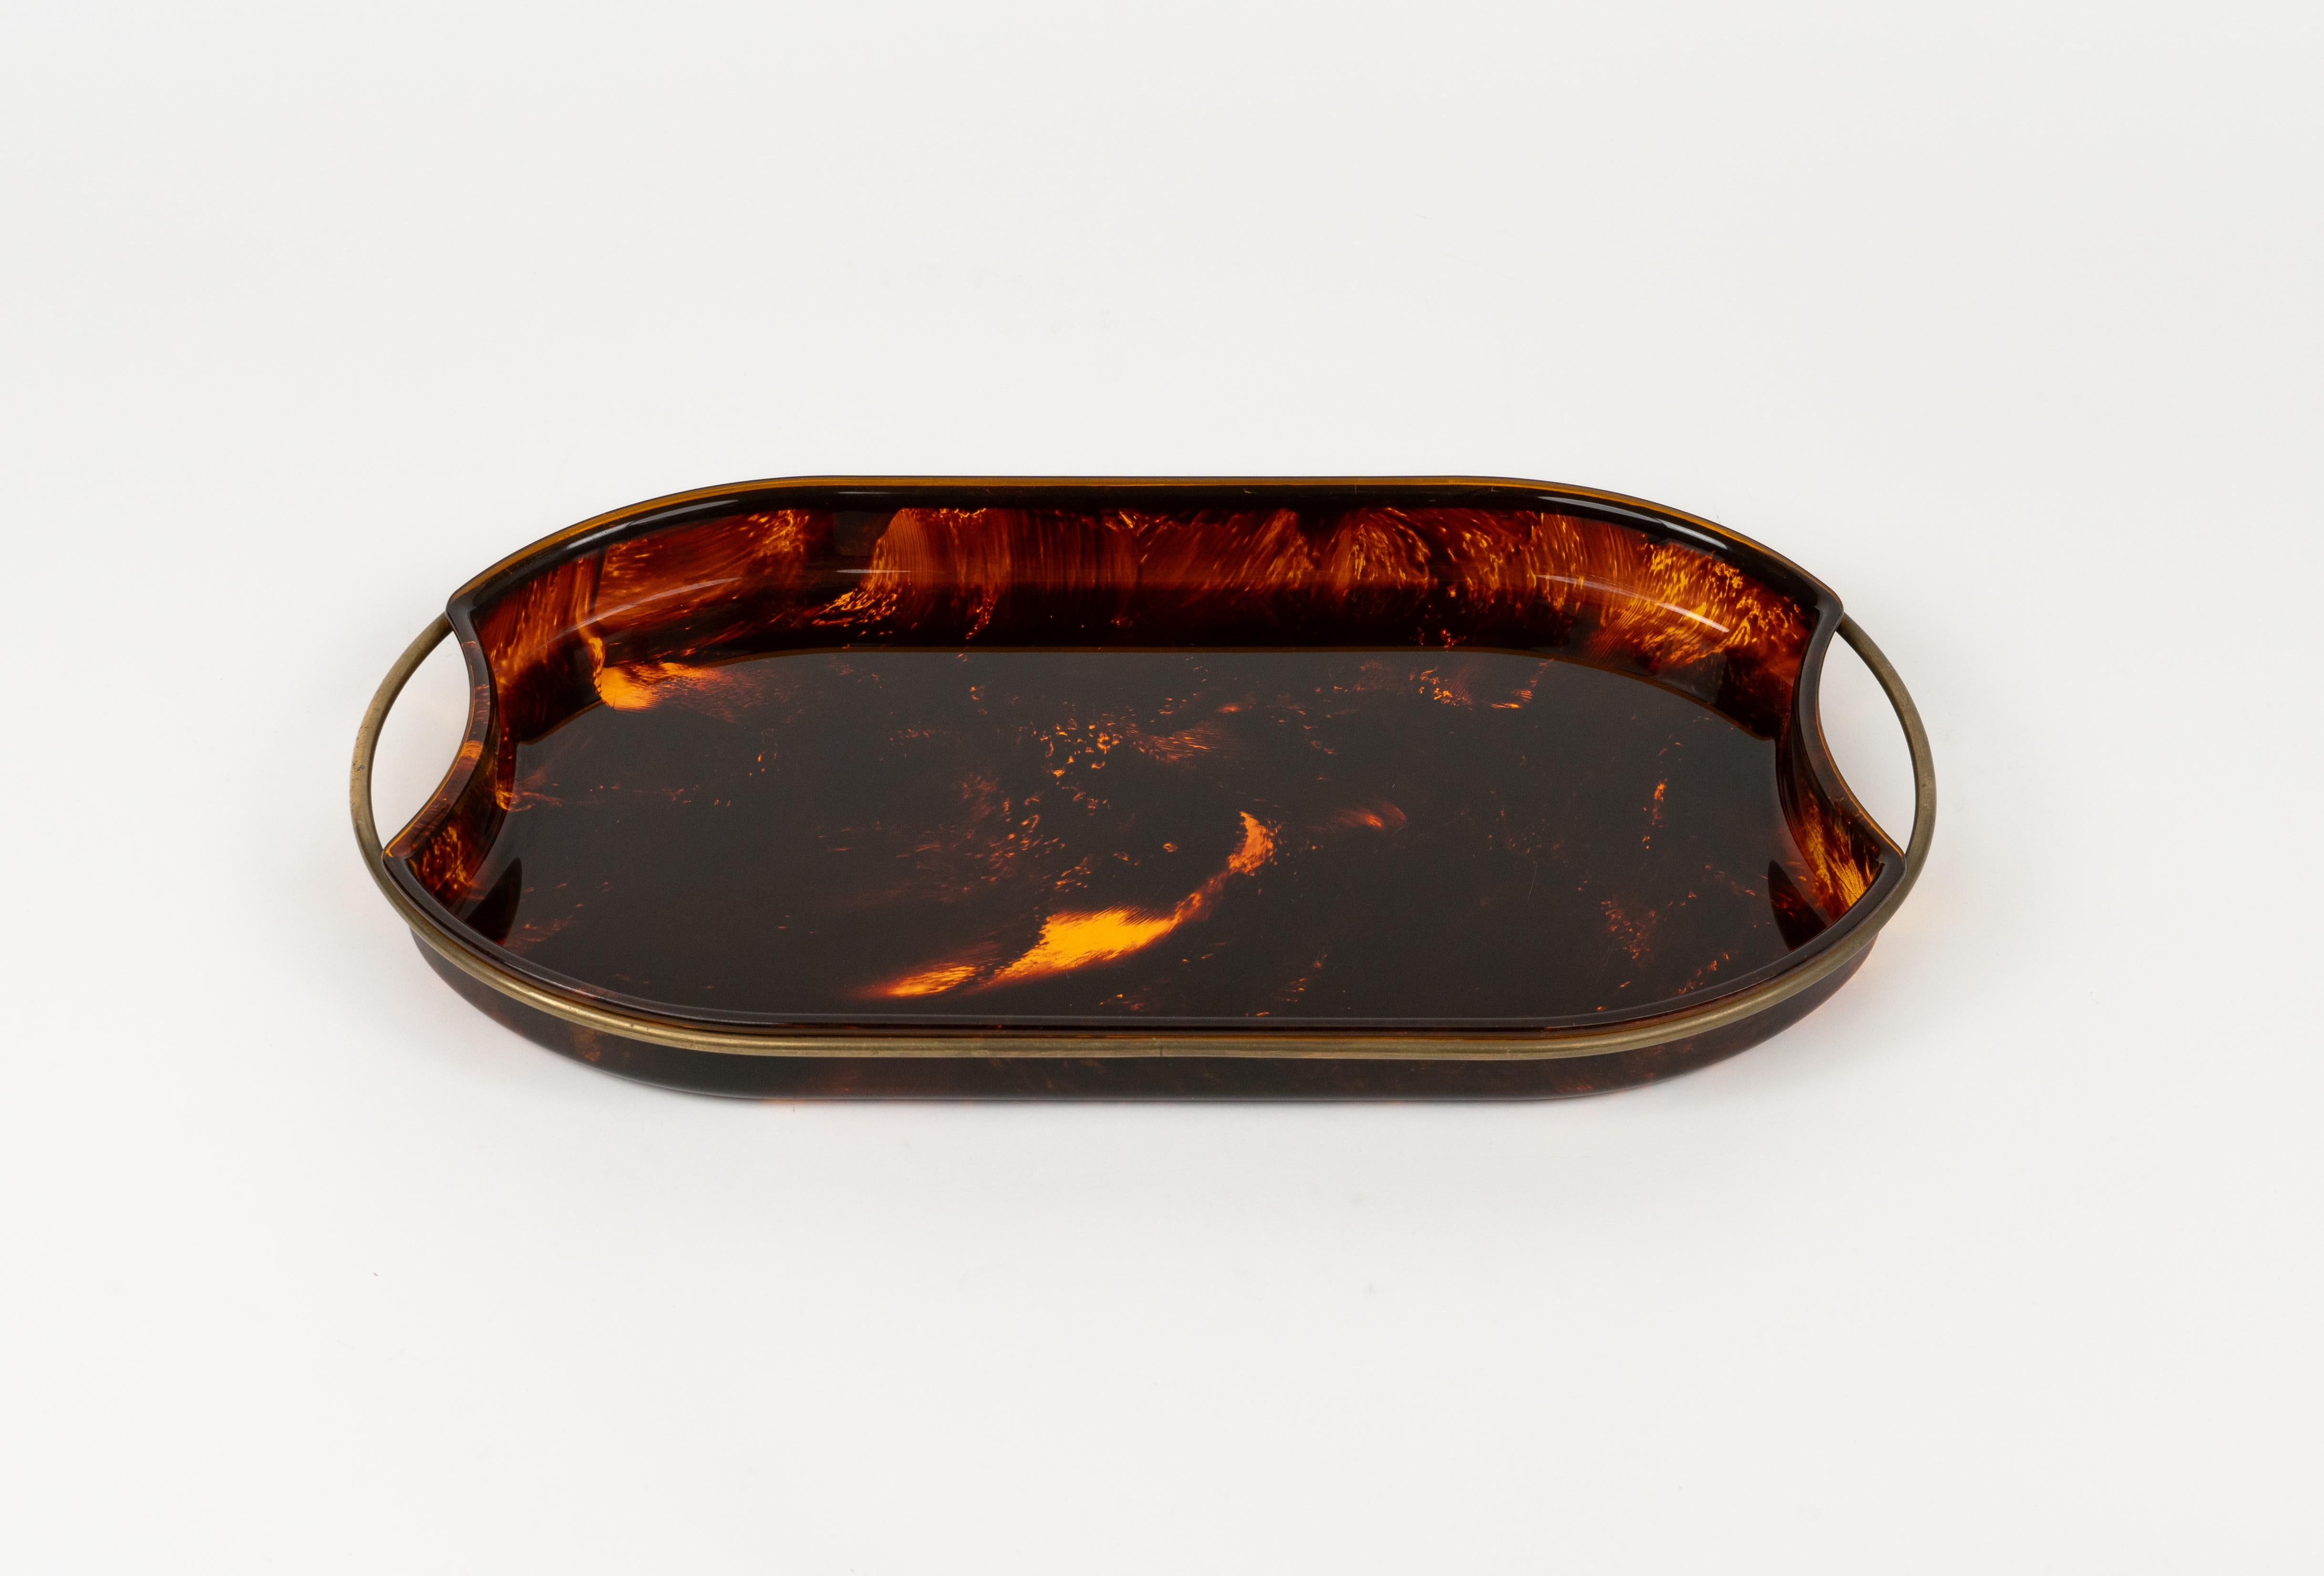 Midcentury amazing oval serving tray in faux tortoiseshell-effect Lucite featuring brass handles and borders by Team Guzzini.   

Made in Italy in the 1970s.   

It's an iconic tray or plate made of lucite that will wow your guests and is perfect